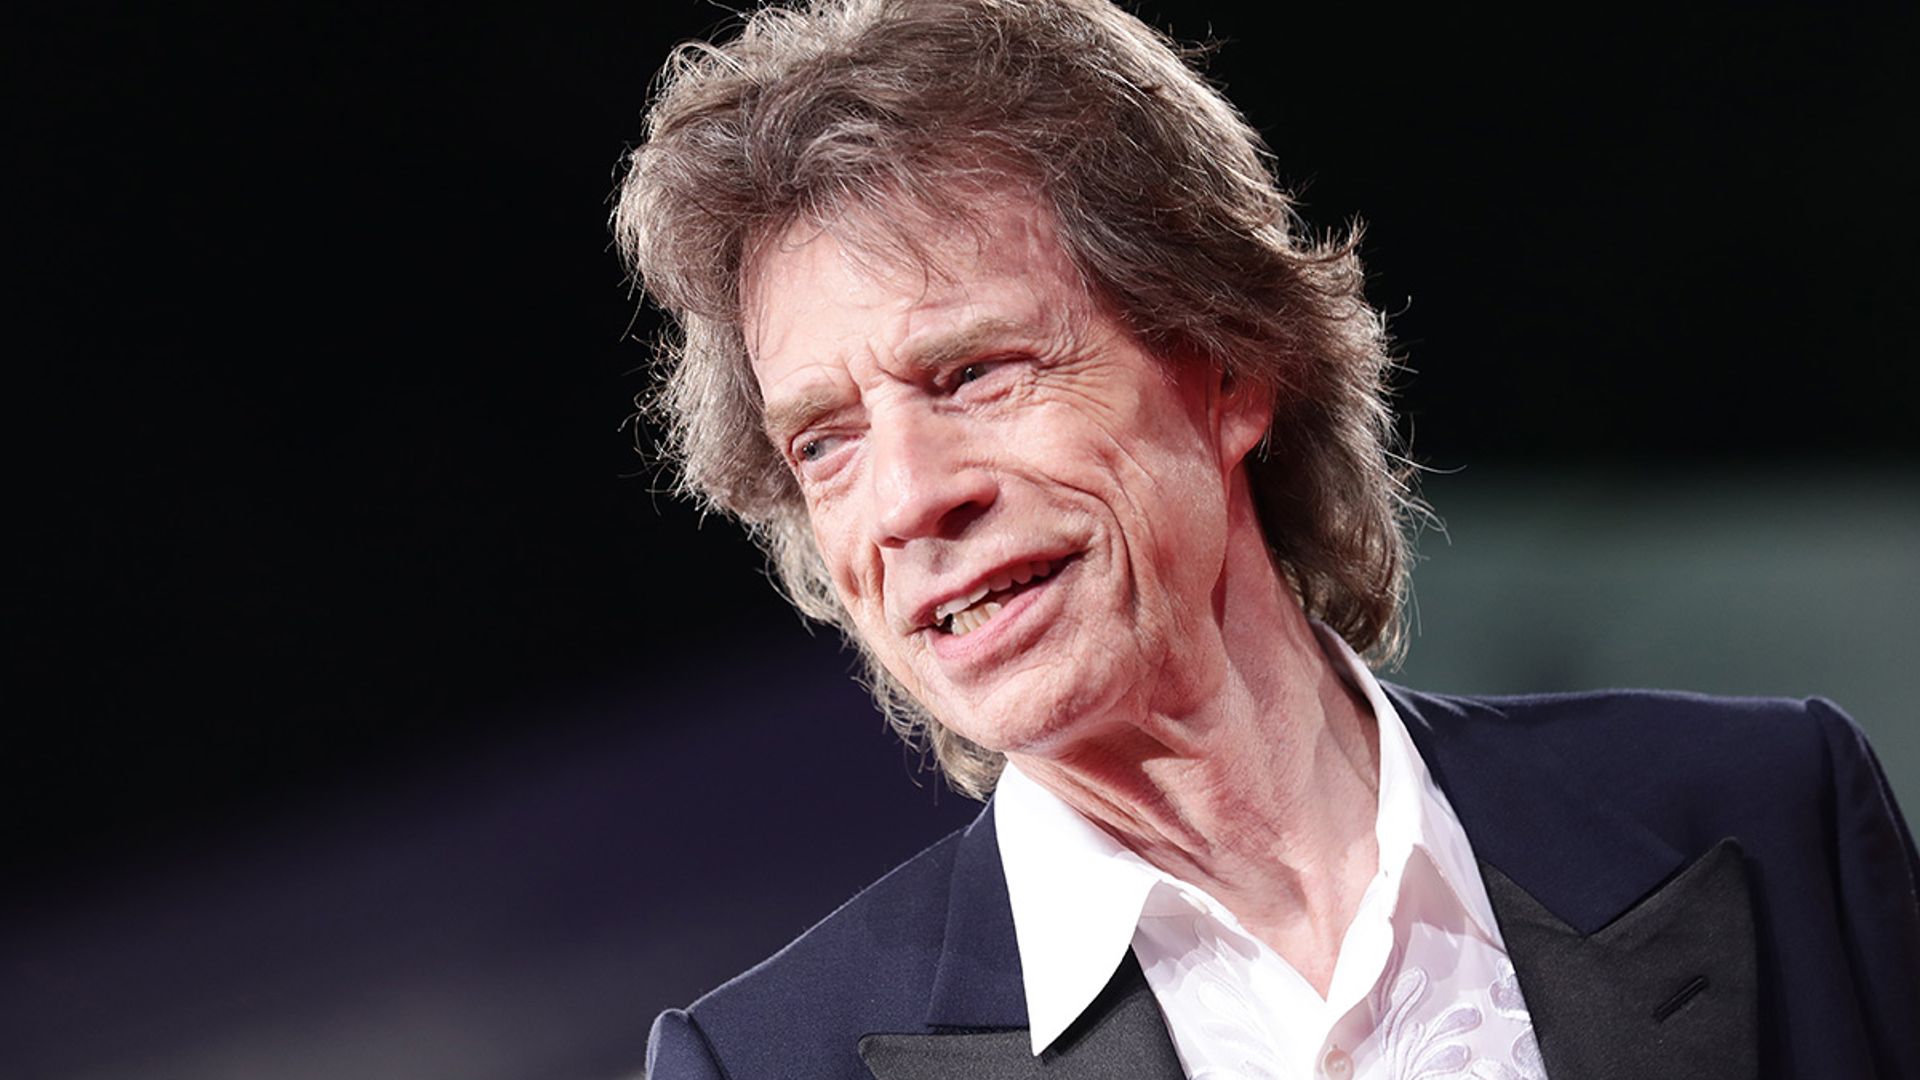 Mick Jagger's four-year-old son is his double in rare new photo